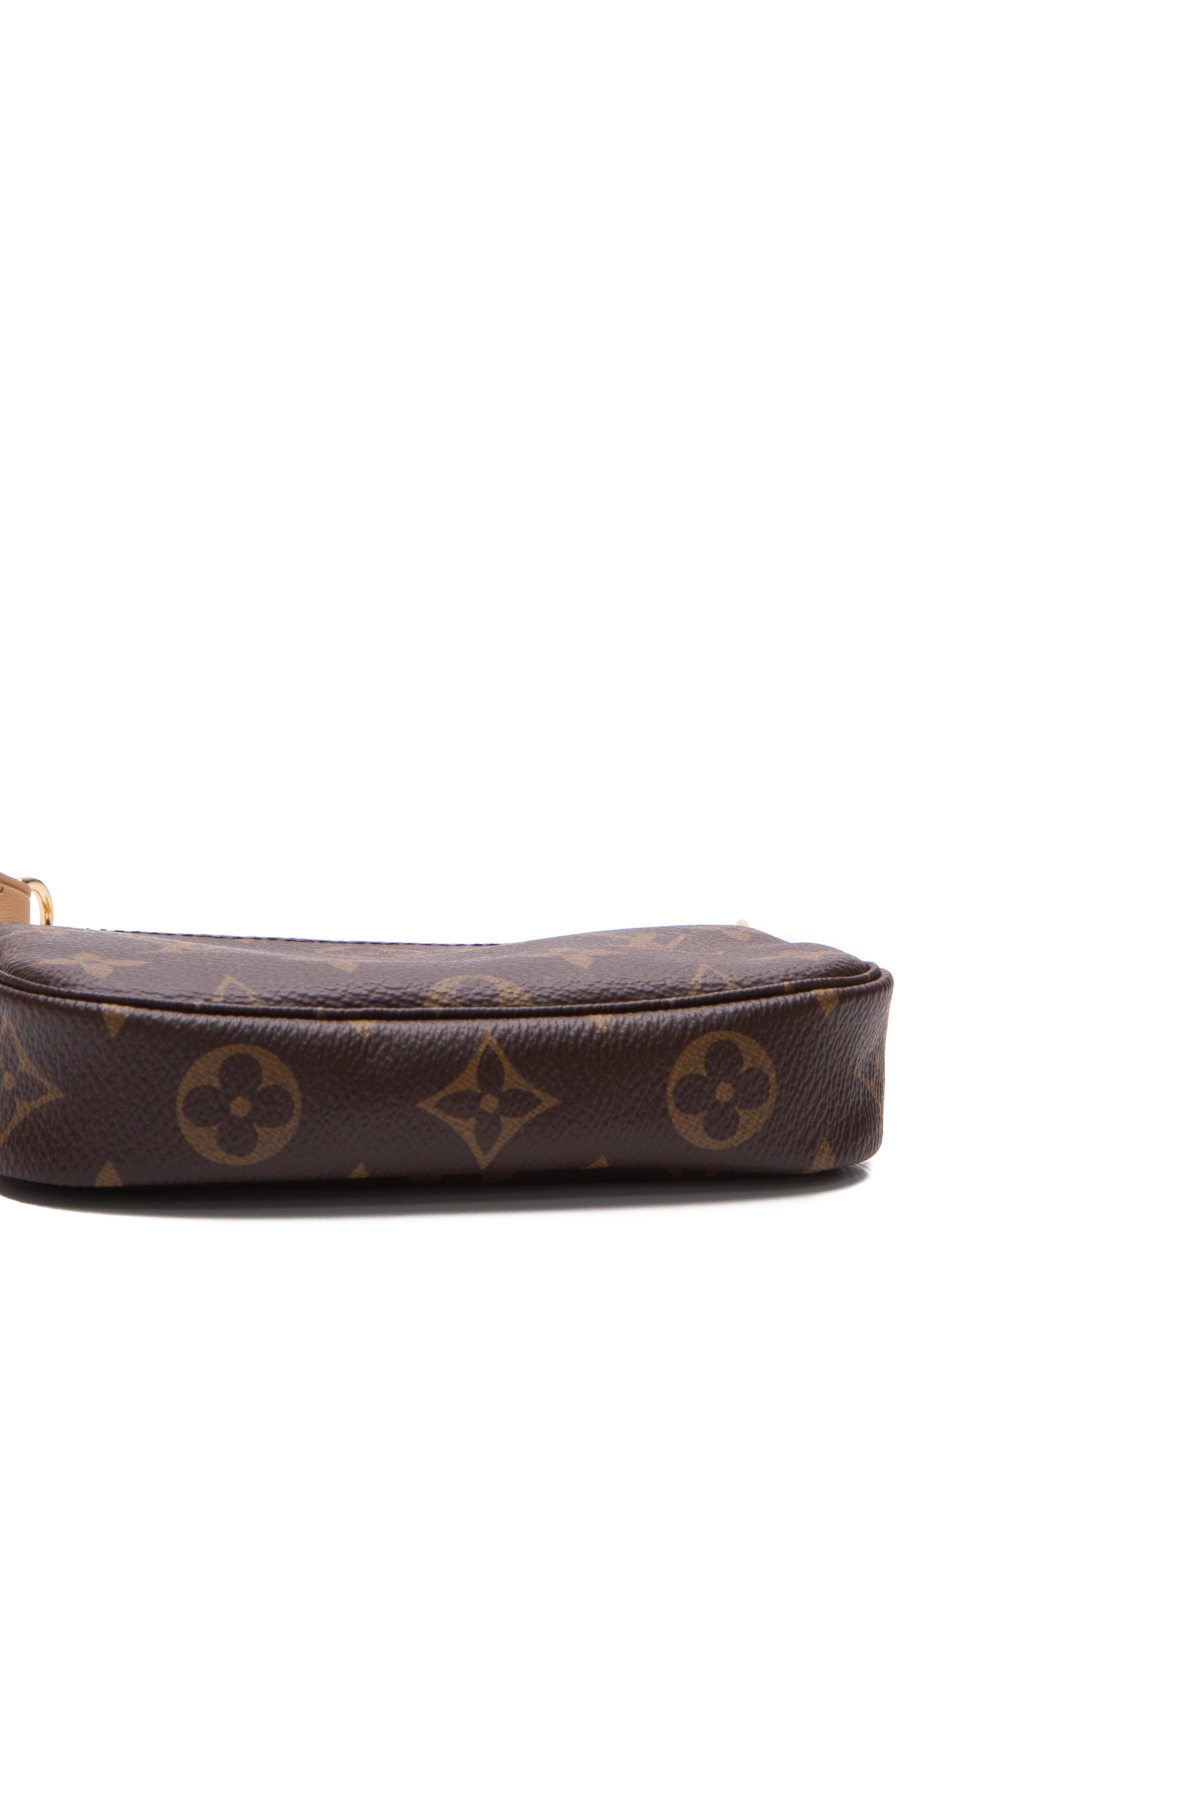 Louis Vuitton Pochette  Buy or Sell your LV accessories